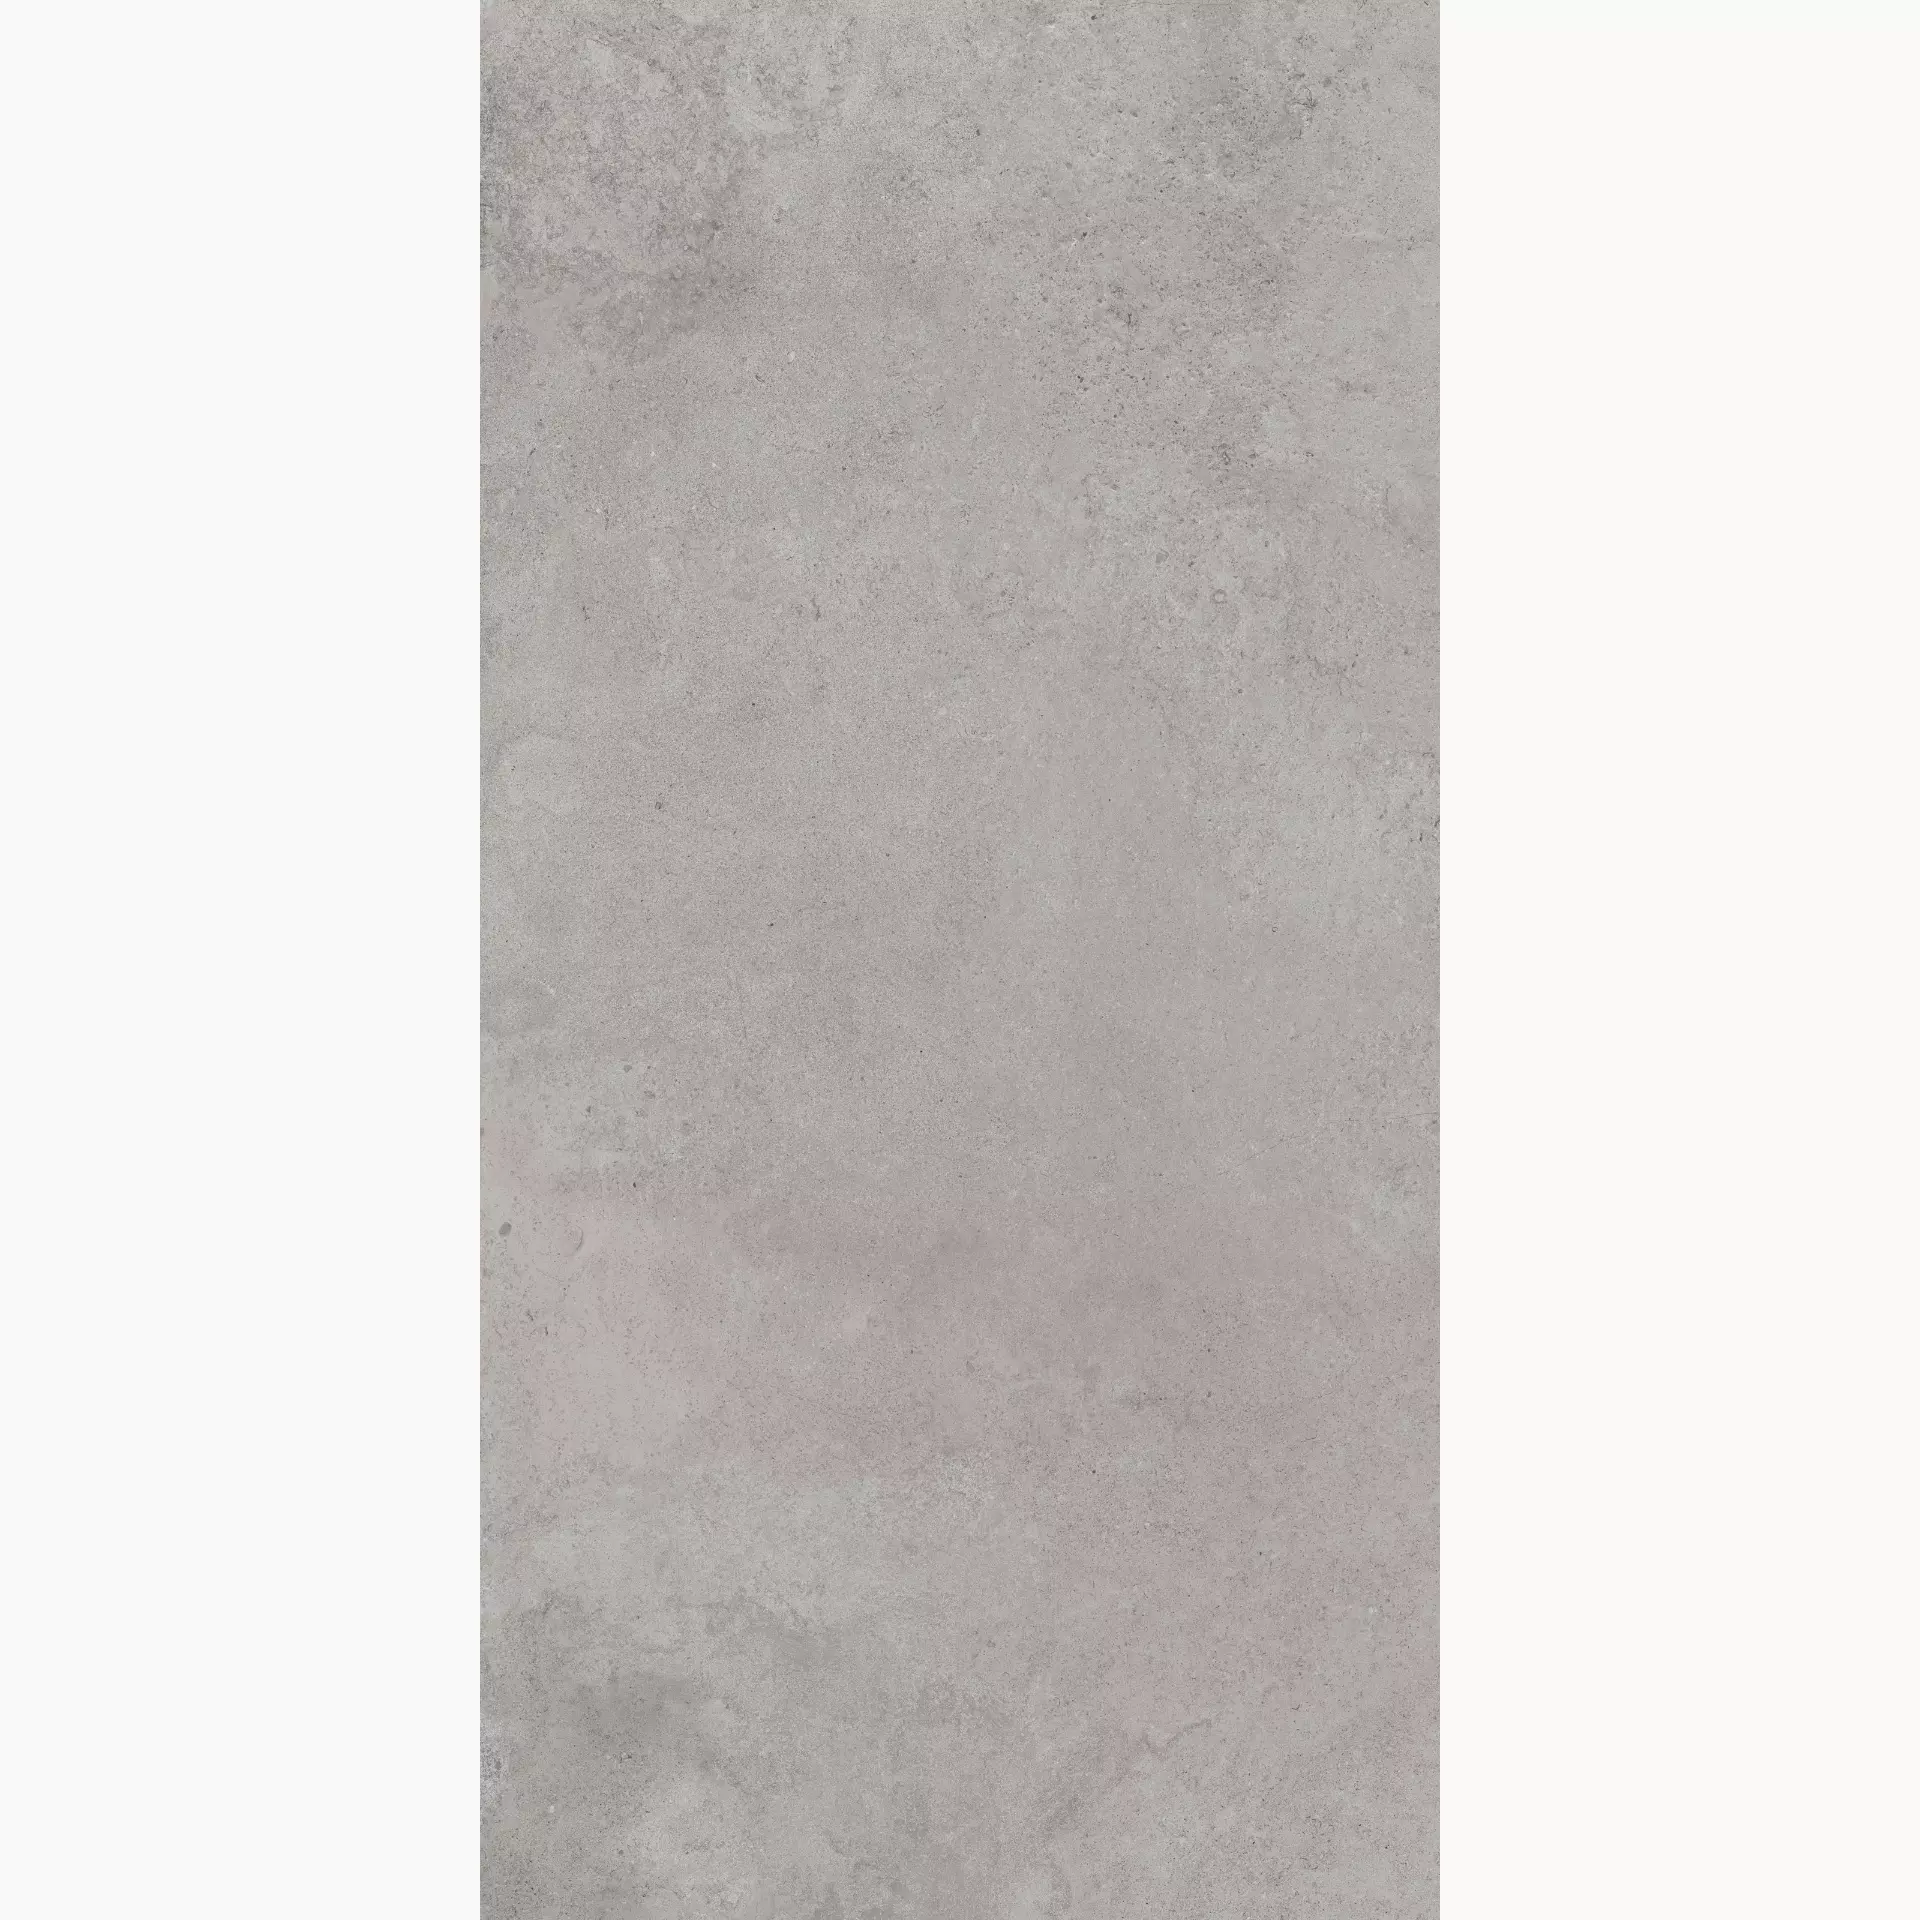 ABK Alpes Wide Grey Naturale PF60000204 80x160cm rectified 8,5mm